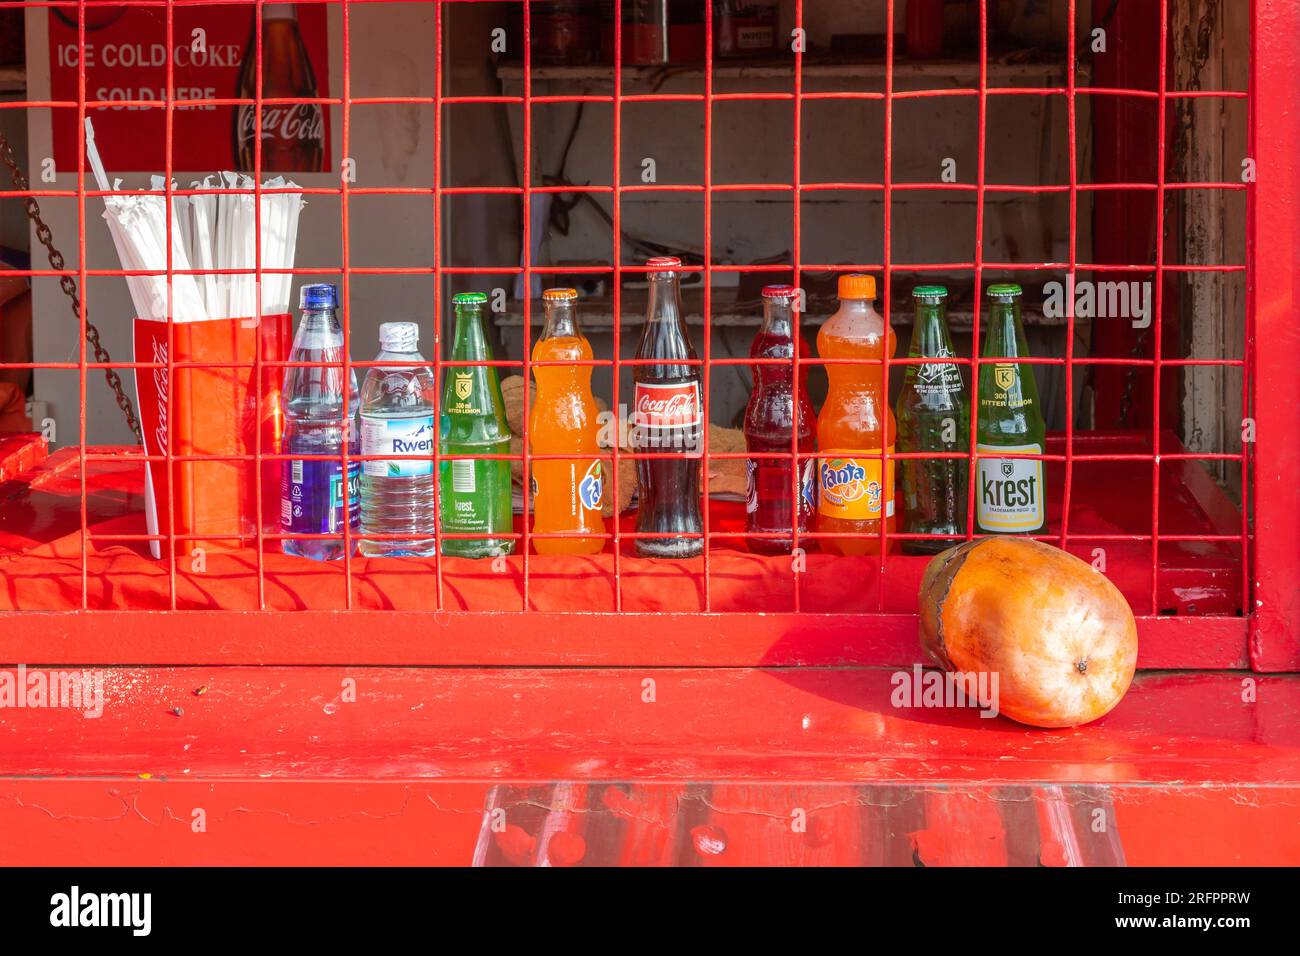 Alignment of bottles offering various drinks behind the fence of a closed red shop. Jinja, Uganda. Stock Photo